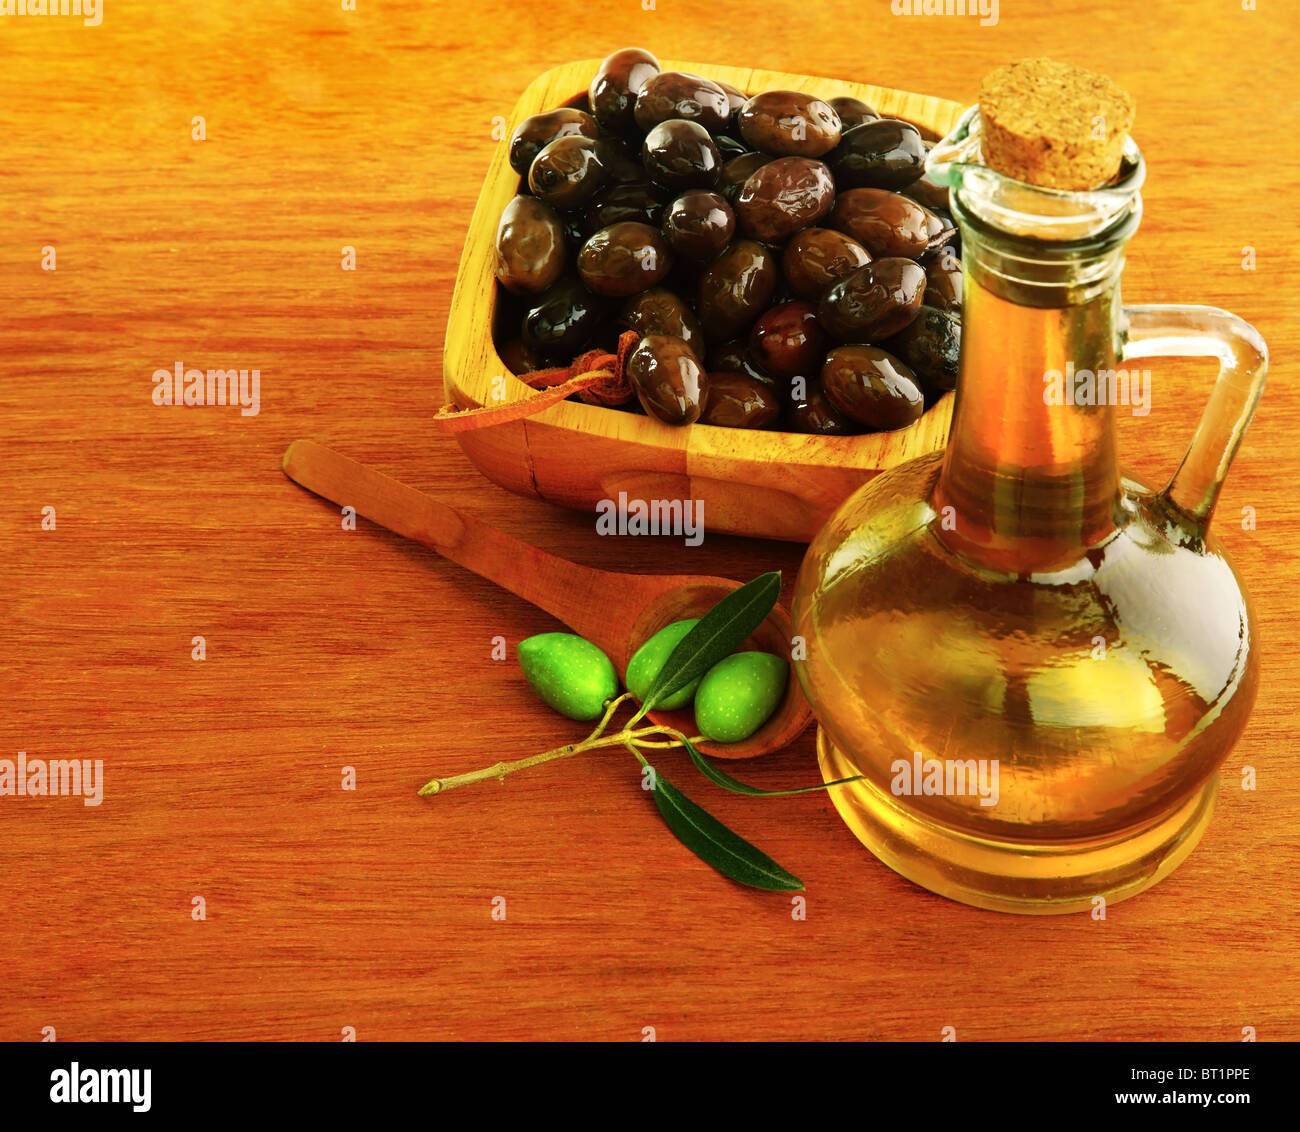 Olive Oil with fresh green & marinated black olives over wood background Stock Photo